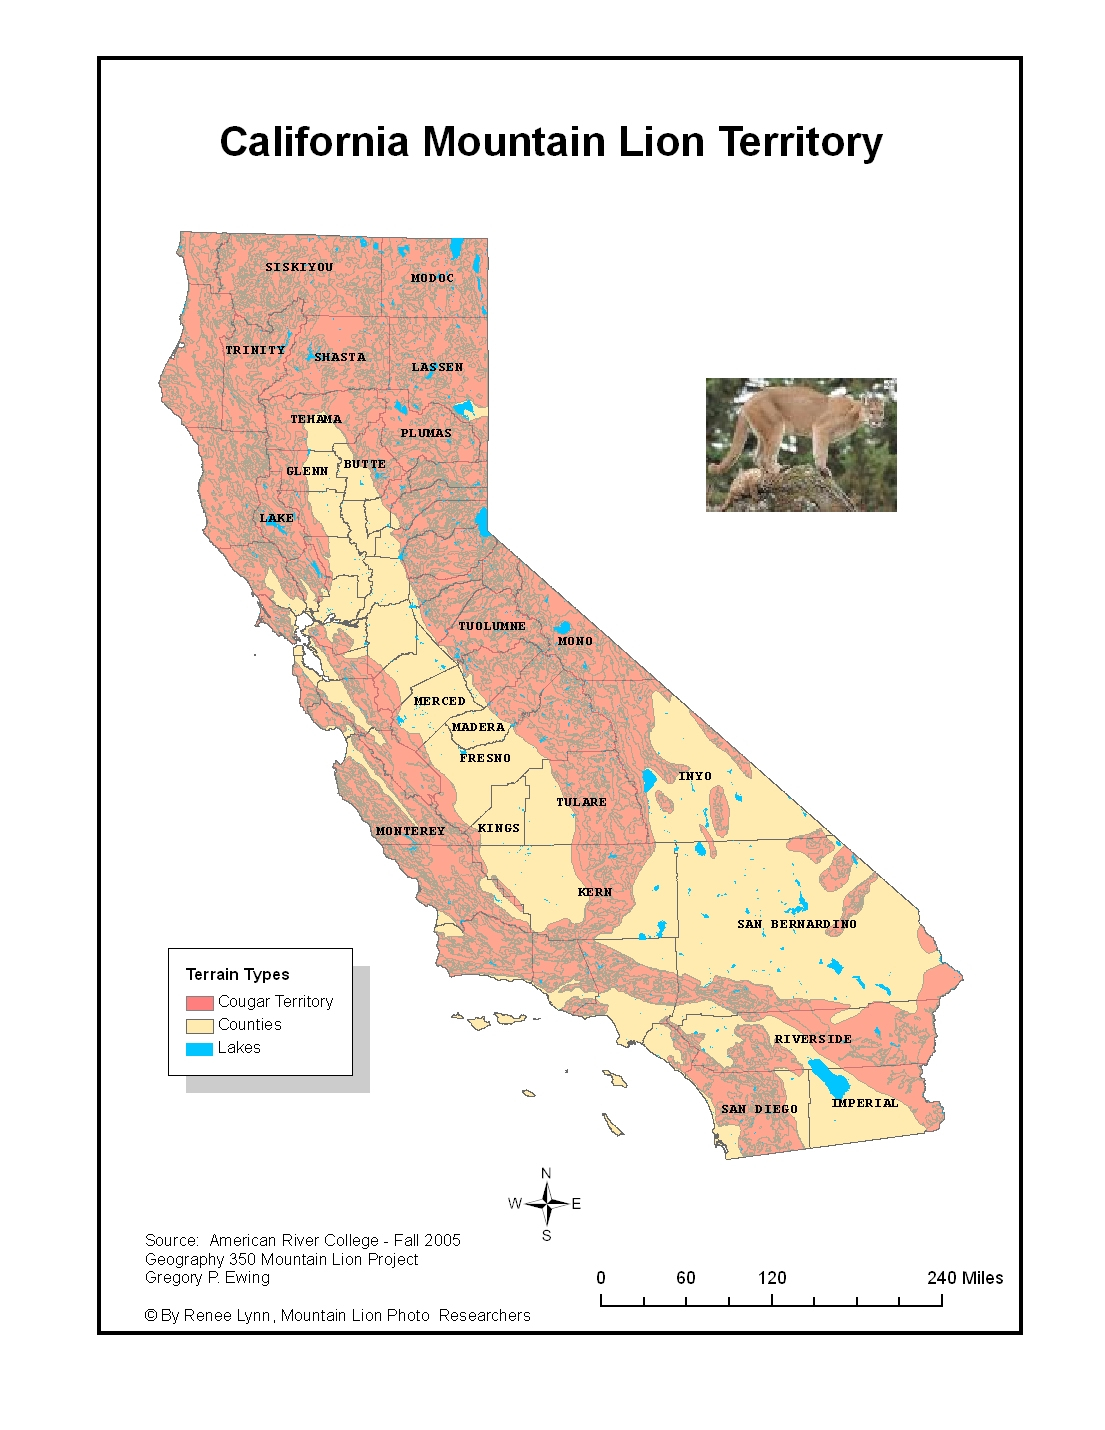 G350_Ewing_Project - Mountain Lions In California Map